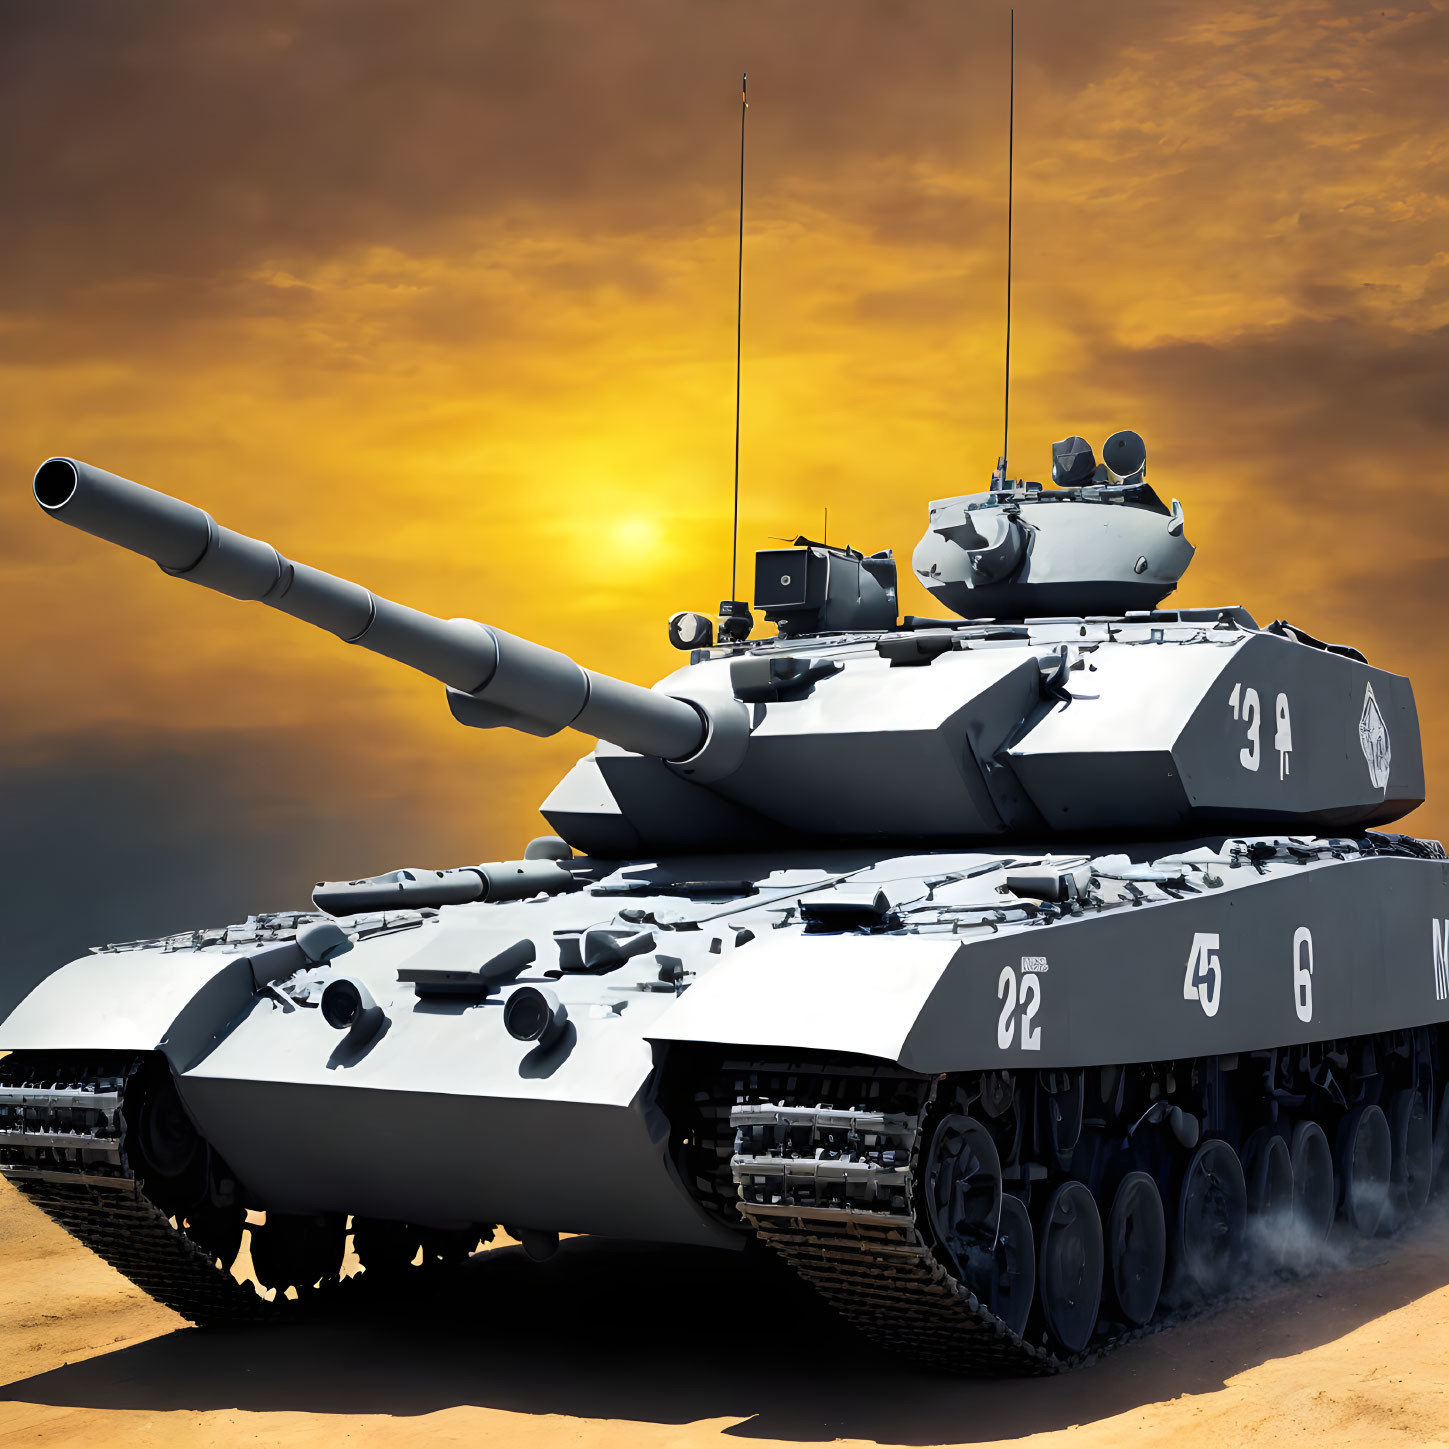 Military battle tank against dramatic sunset sky with white markings